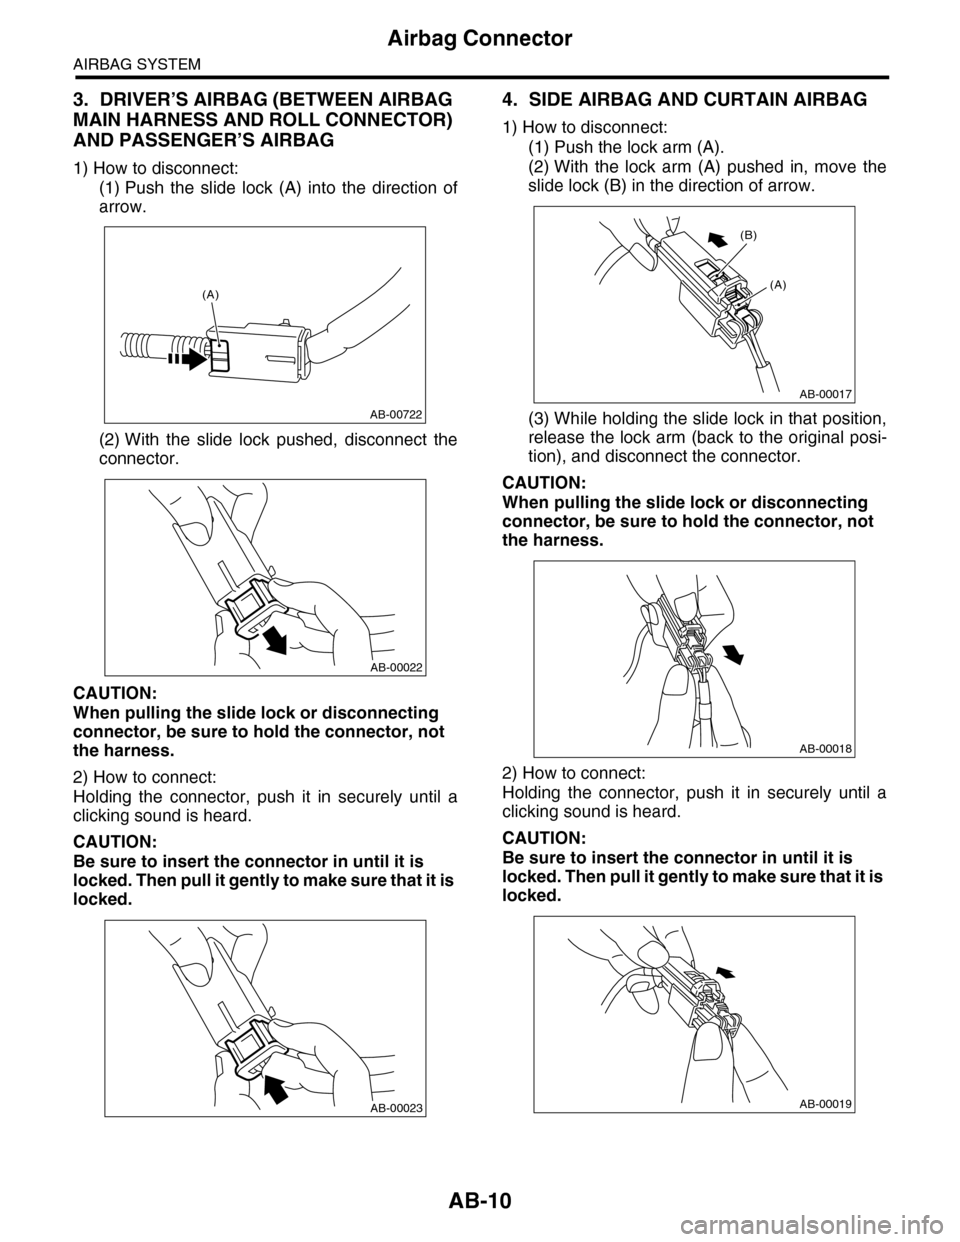 SUBARU TRIBECA 2009 1.G Service Workshop Manual AB-10
Airbag Connector
AIRBAG SYSTEM
3. DRIVER’S AIRBAG (BETWEEN AIRBAG 
MAIN HARNESS AND ROLL CONNECTOR) 
AND PASSENGER’S AIRBAG
1) How to disconnect:
(1) Push  the  slide  lock  (A)  into  the  